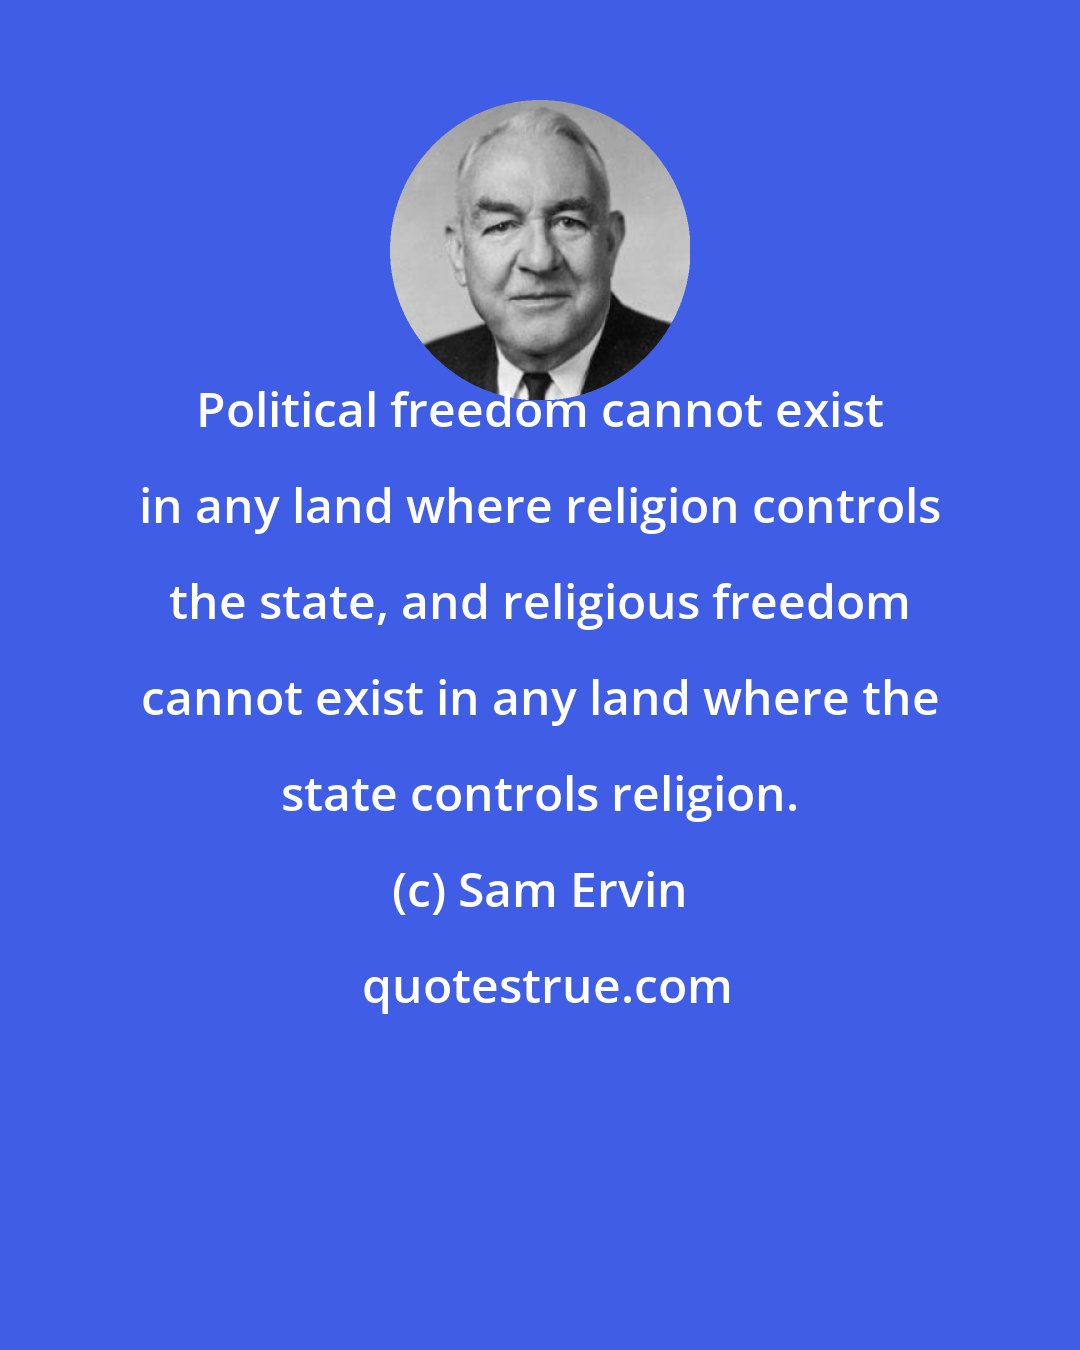 Sam Ervin: Political freedom cannot exist in any land where religion controls the state, and religious freedom cannot exist in any land where the state controls religion.